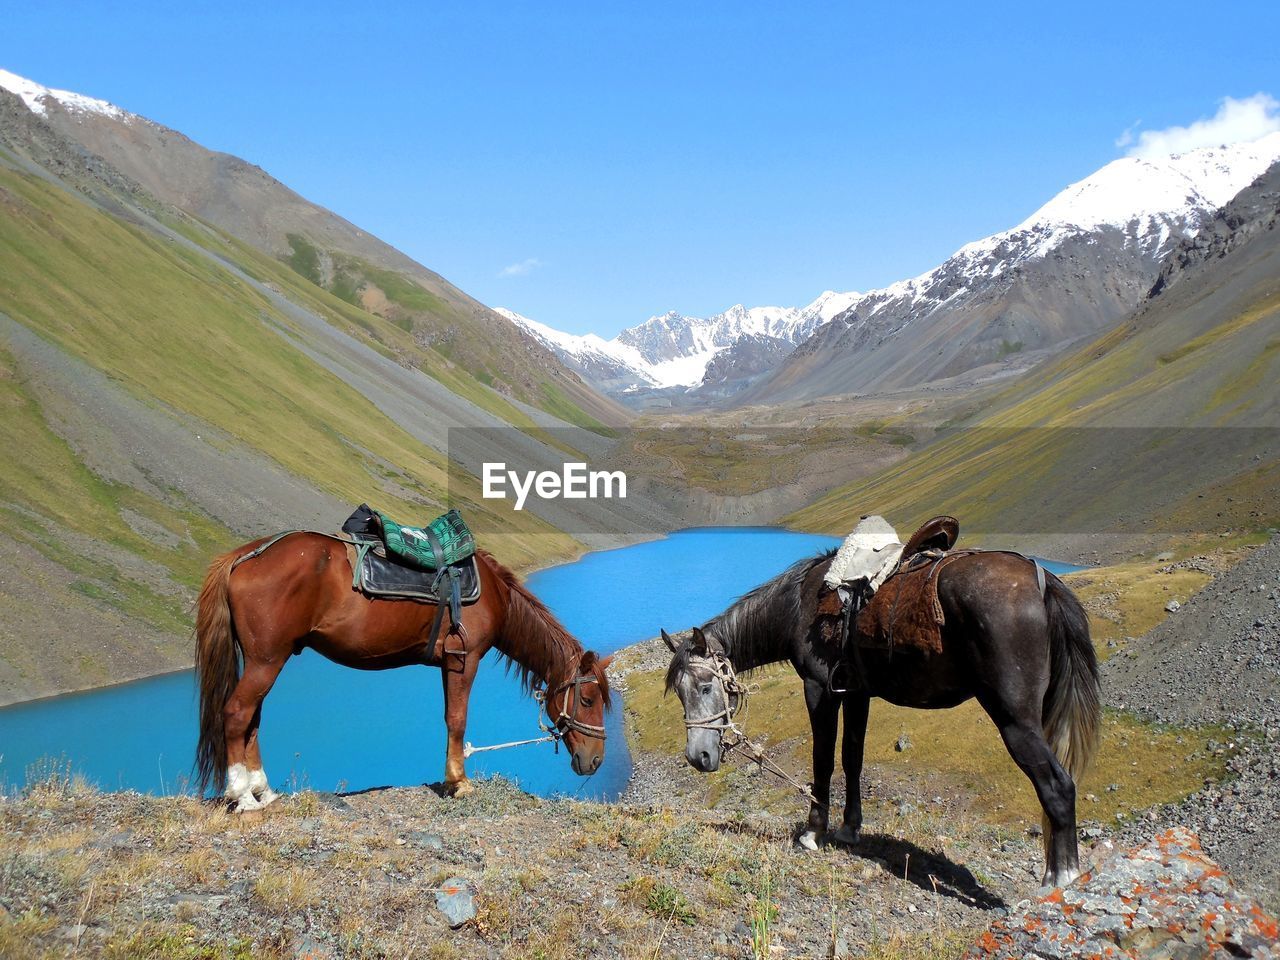 Rest with horses at a blue mountain lake in the kyrgyz foothills of the altai mountains